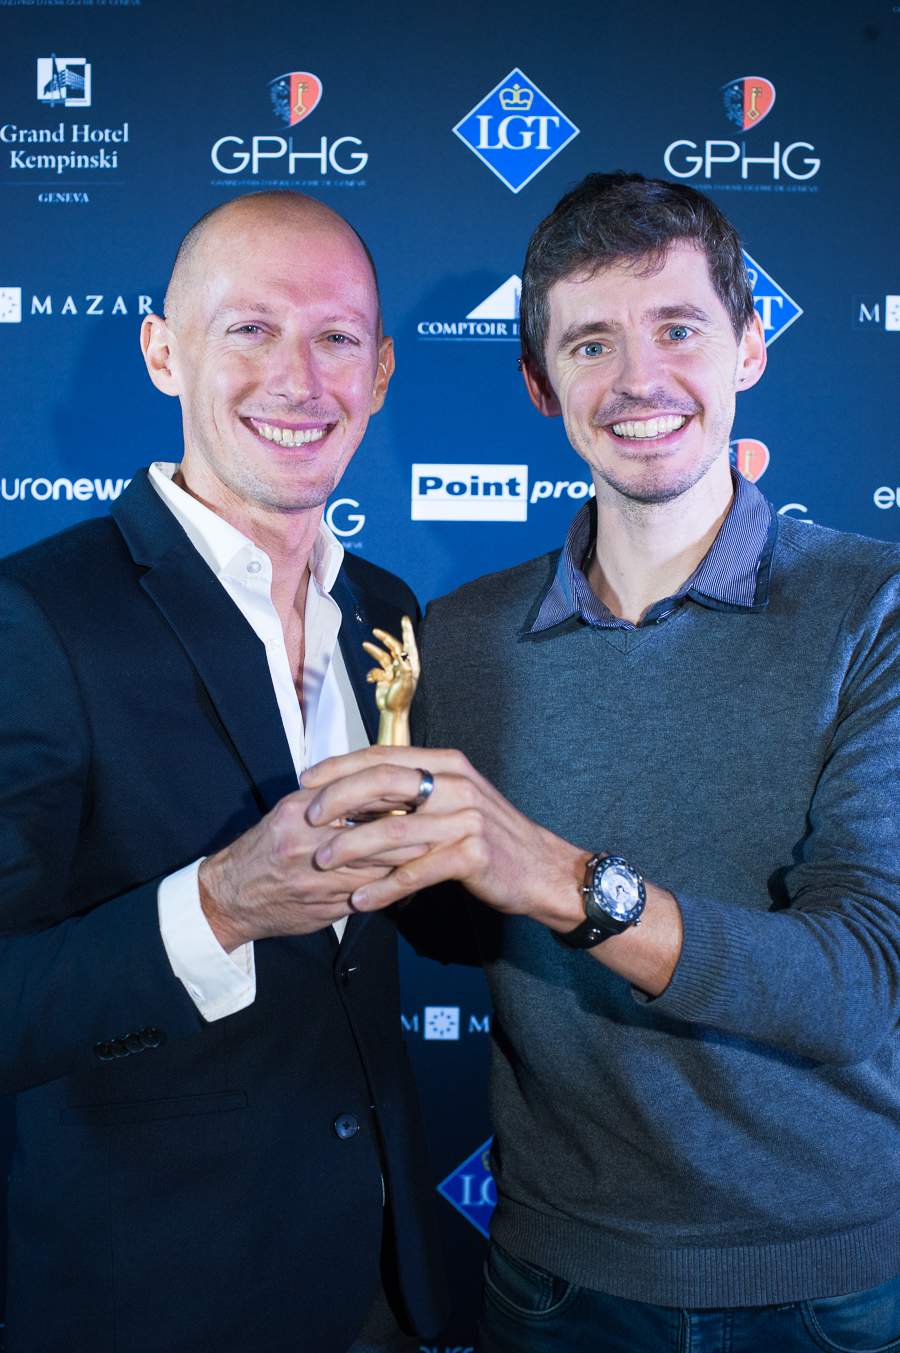 Marco Borraccino,Co-founder and CEO of Singer Reimagined, winner of the Chronograph Watch Prize 2018 and Nicolas Wiederrecht, Co-director Agenhor SA